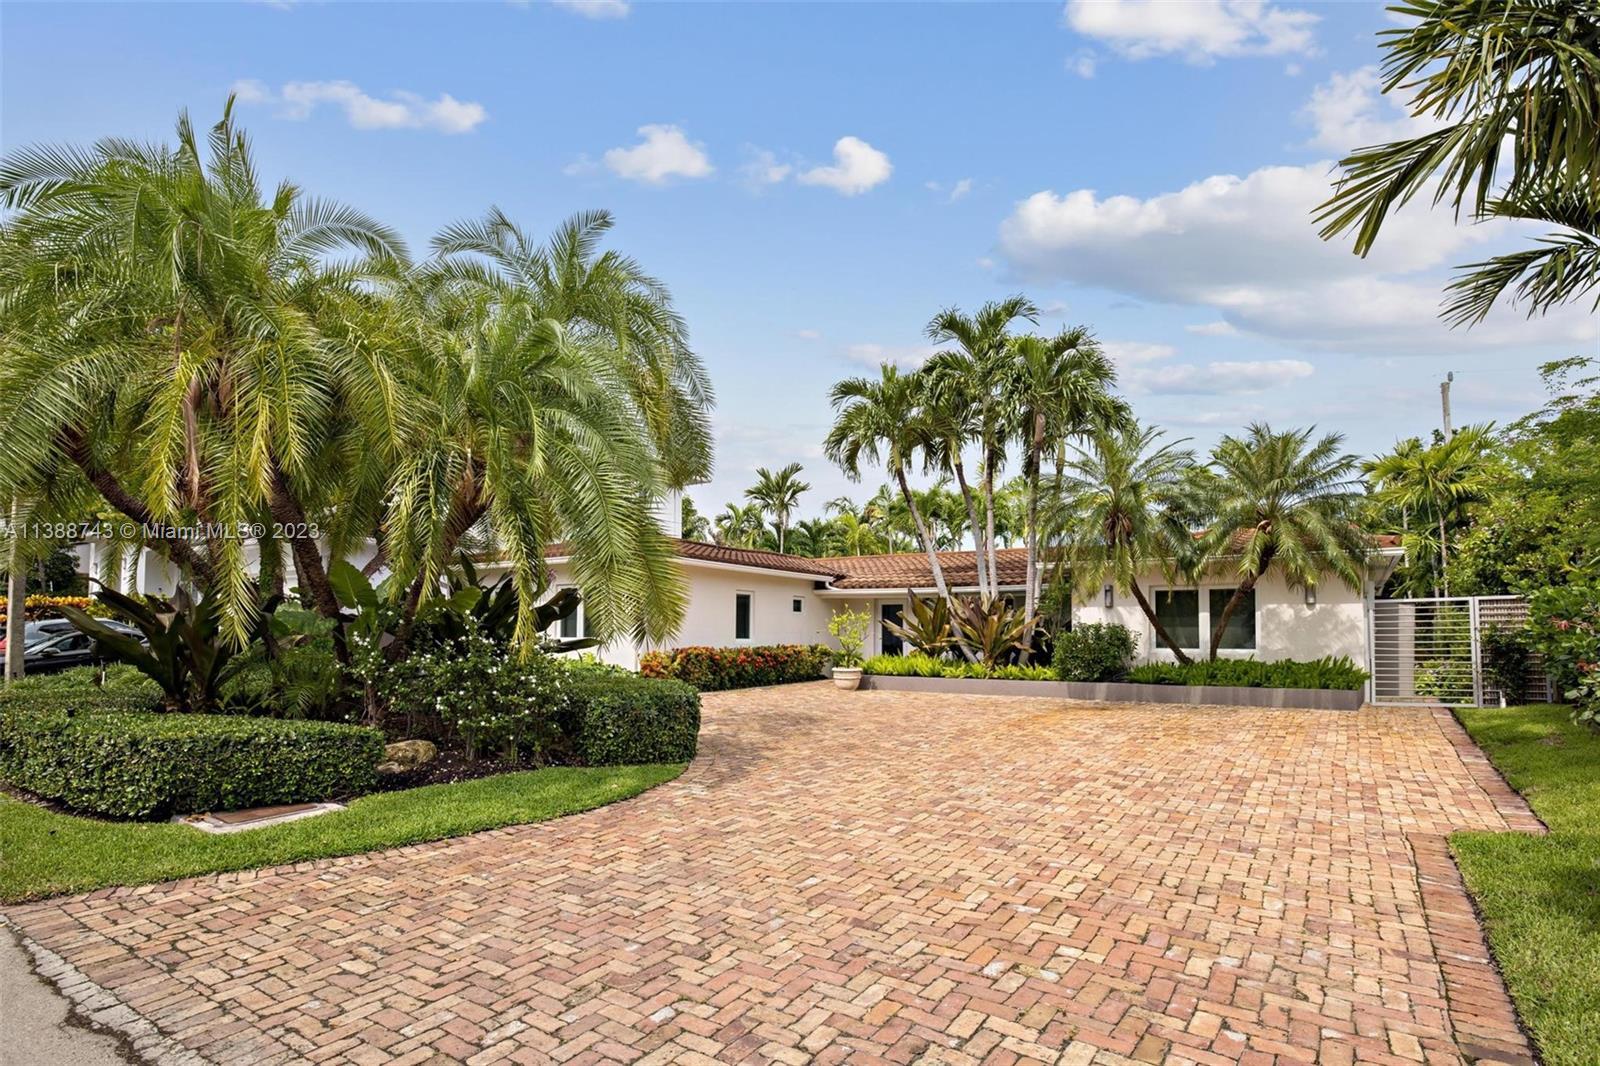 Photo of 670 Allendale Rd in Key Biscayne, FL